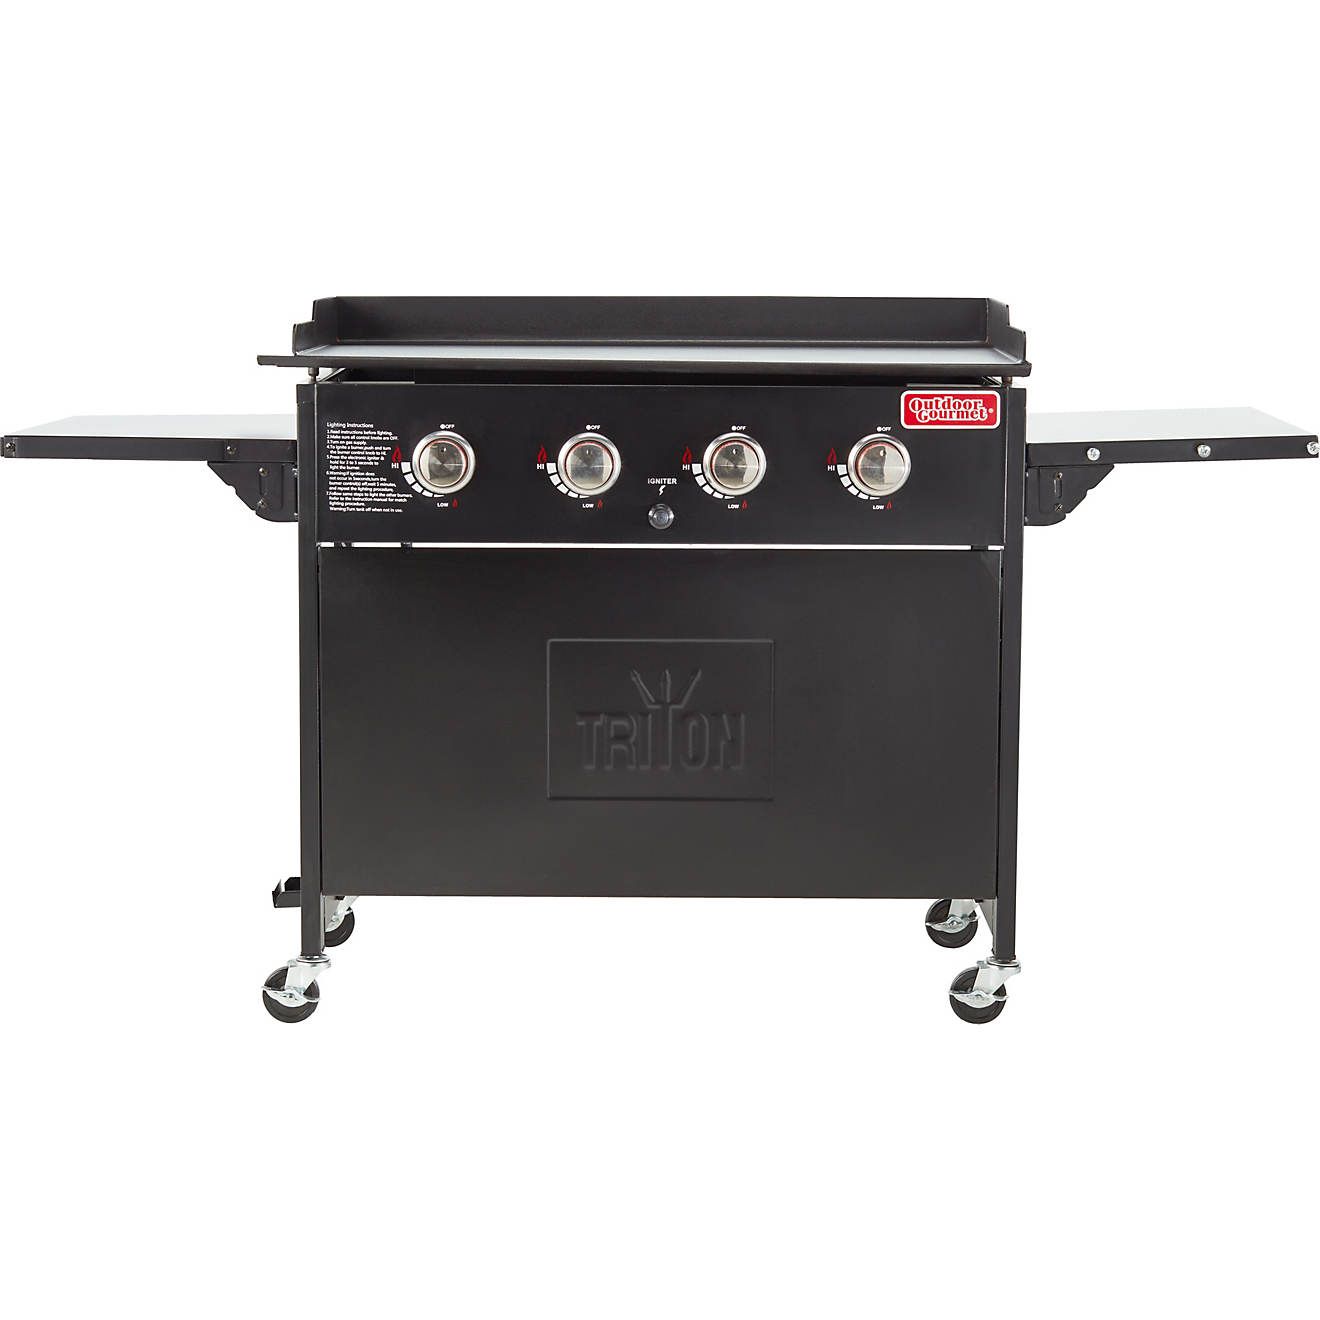 Outdoor Gourmet 4-Burner Griddle | Academy Sports + Outdoor Affiliate